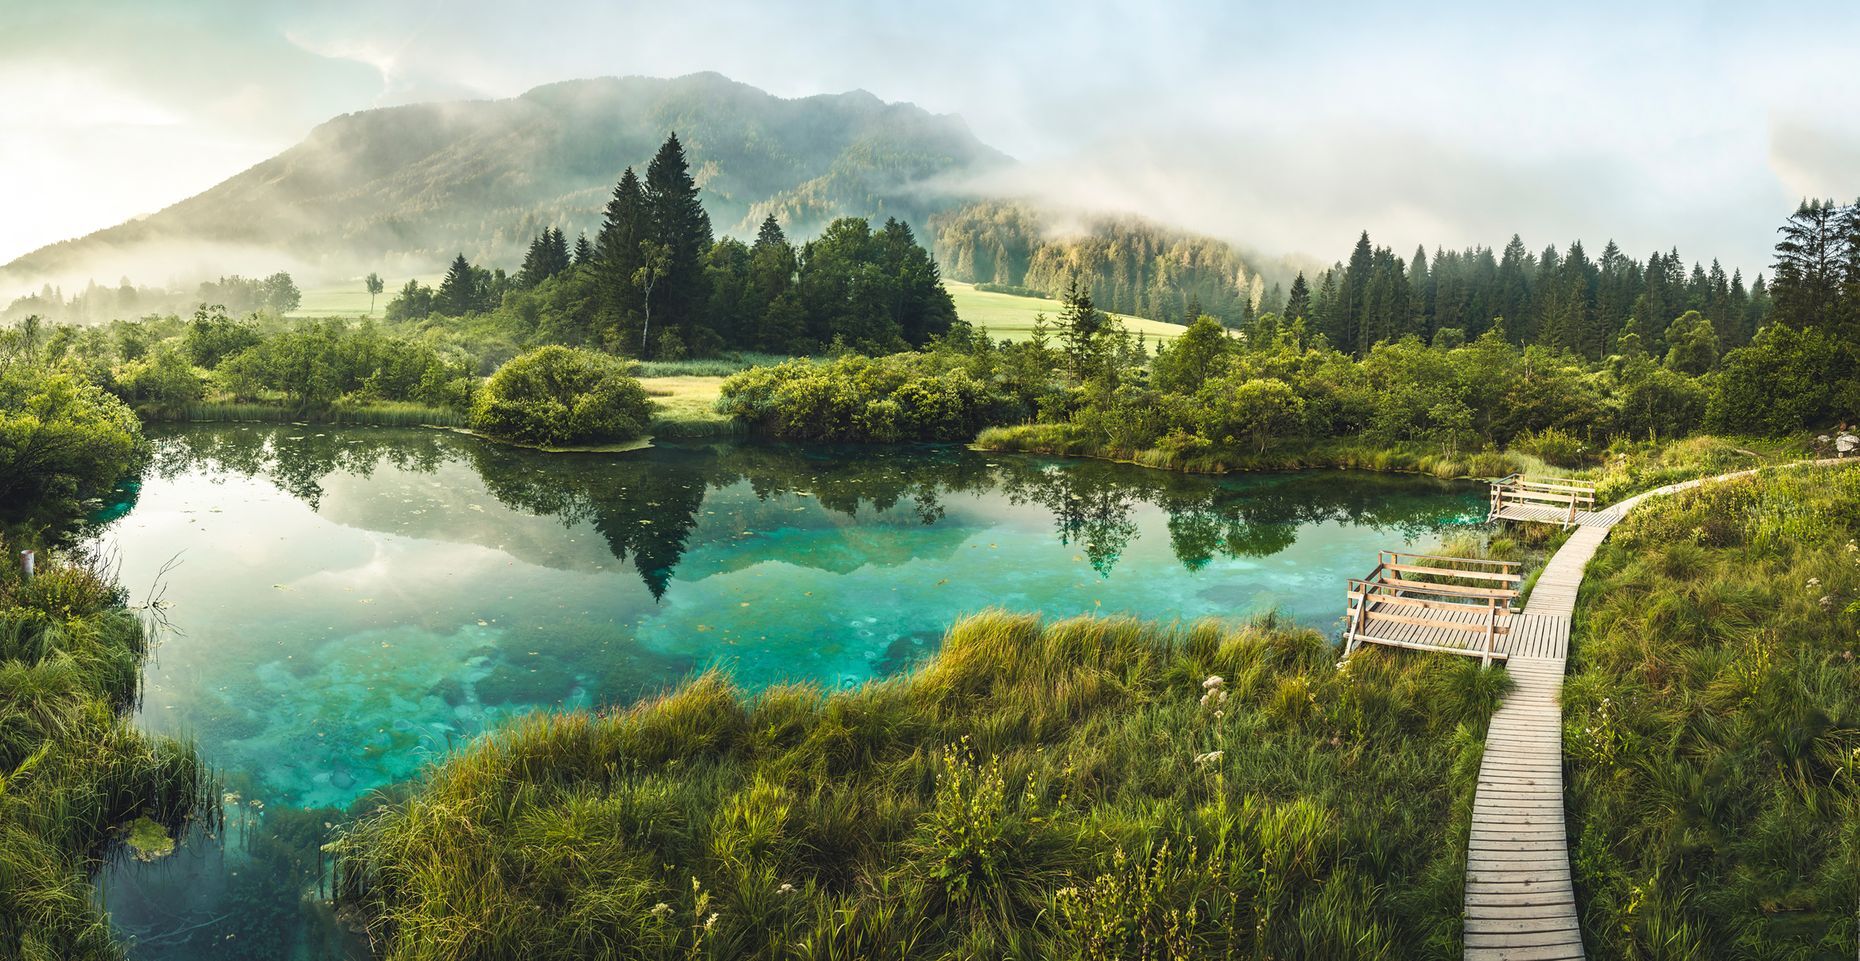 <p>Nestled in the heart of the Julian Alps, <a href="https://slovenia-holidays.com/fr/points-forts/zelenci-nature-reserve/">Zelenci Reserve</a> is a natural gem boasting stunning emerald waters that feed into the Sava Dolinka River. The hiking trails that wind through the reserve are a great place to observe Slovenian flora and fauna, culminating in a lookout with panoramic views of the marsh and mountains. Zelenci is a dream destination for nature lovers, outdoor enthusiasts and photographers in search of unspoilt landscapes. Spring or summer is the best time to visit and take full advantage of the beautiful weather.</p>